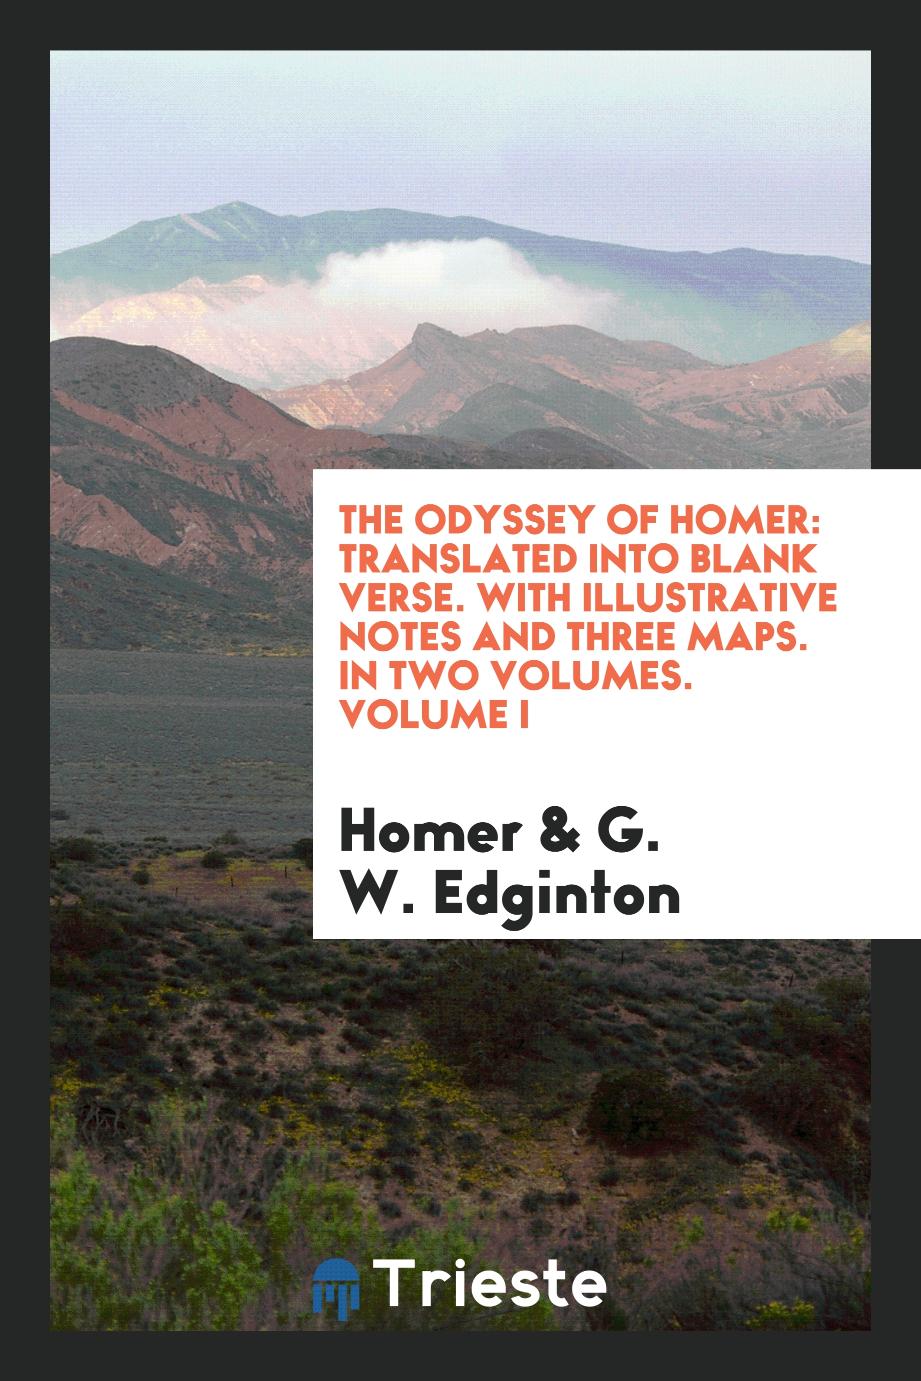 The Odyssey of Homer: Translated into Blank Verse. With Illustrative Notes and Three Maps. In Two Volumes. Volume I